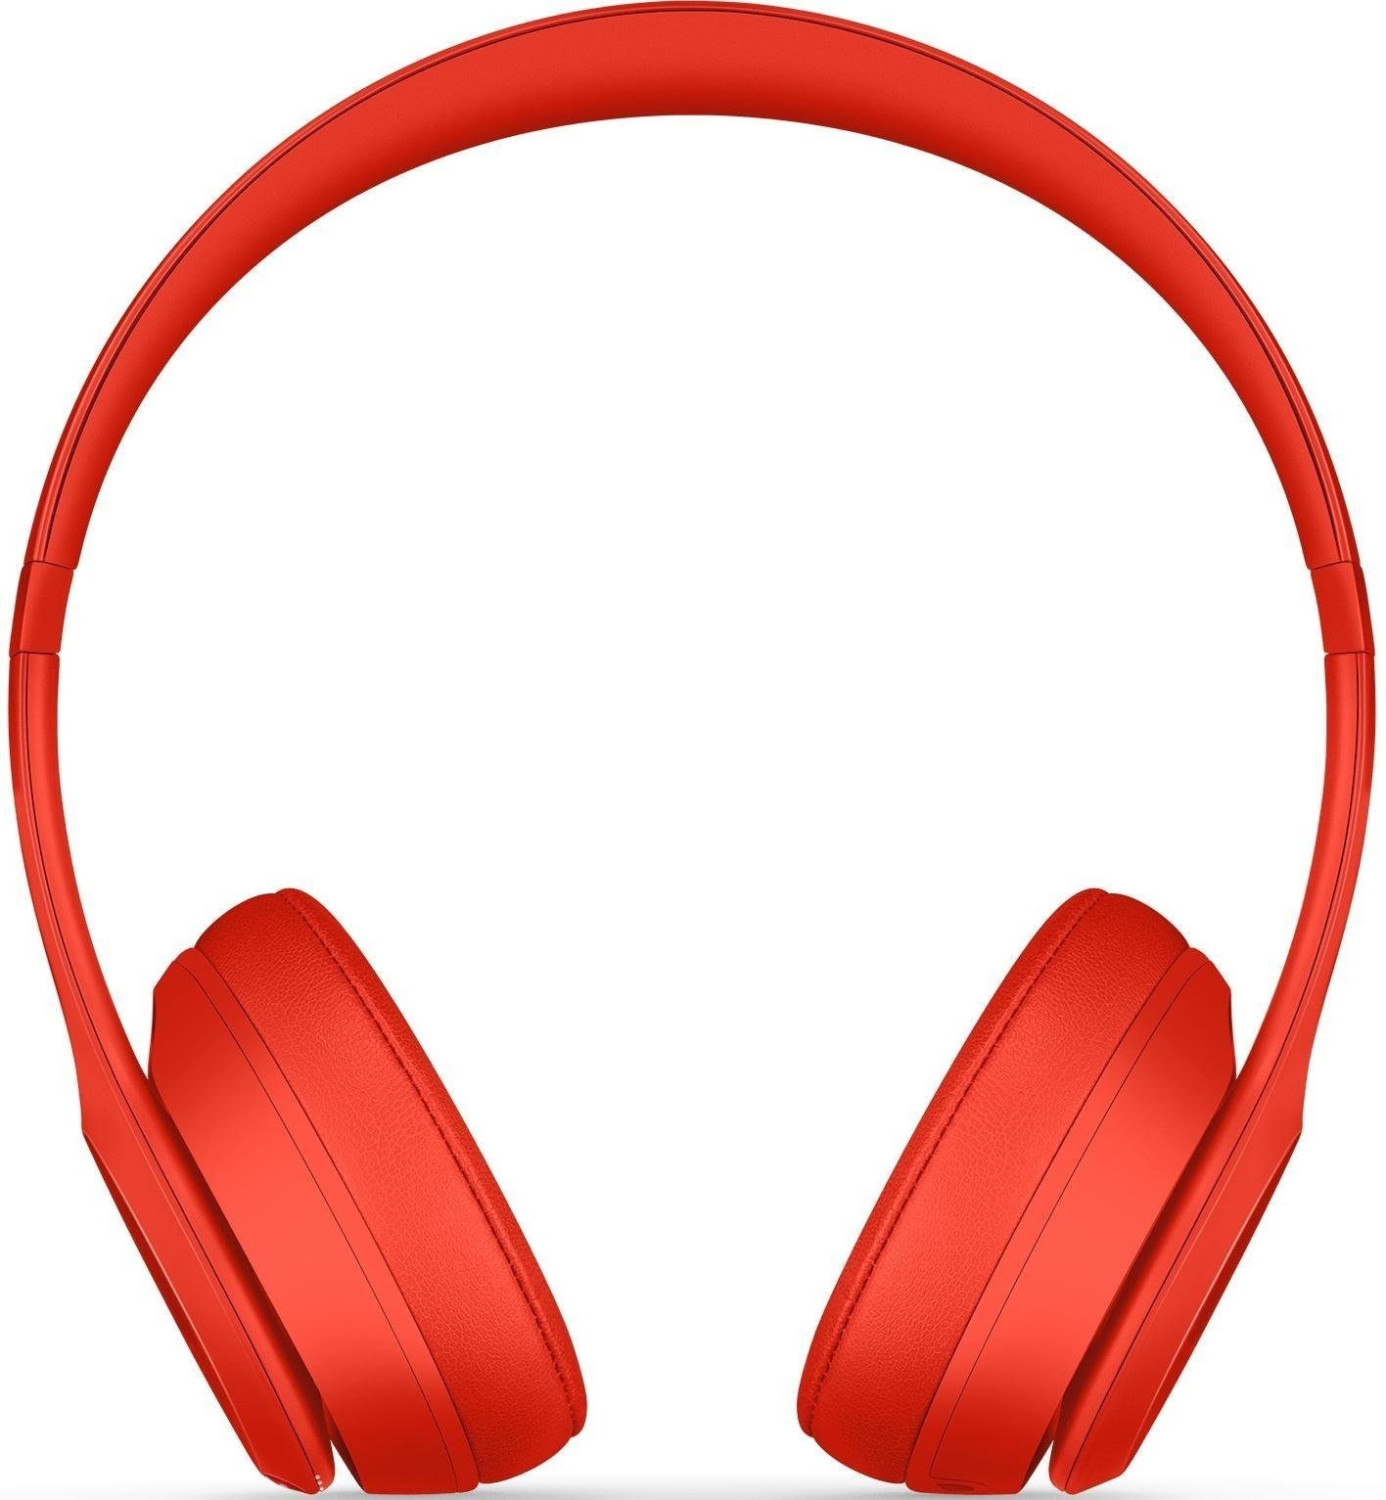 Buy Beats By Dre Solo3 Wireless (Citrus Red) from £129.00 (Today